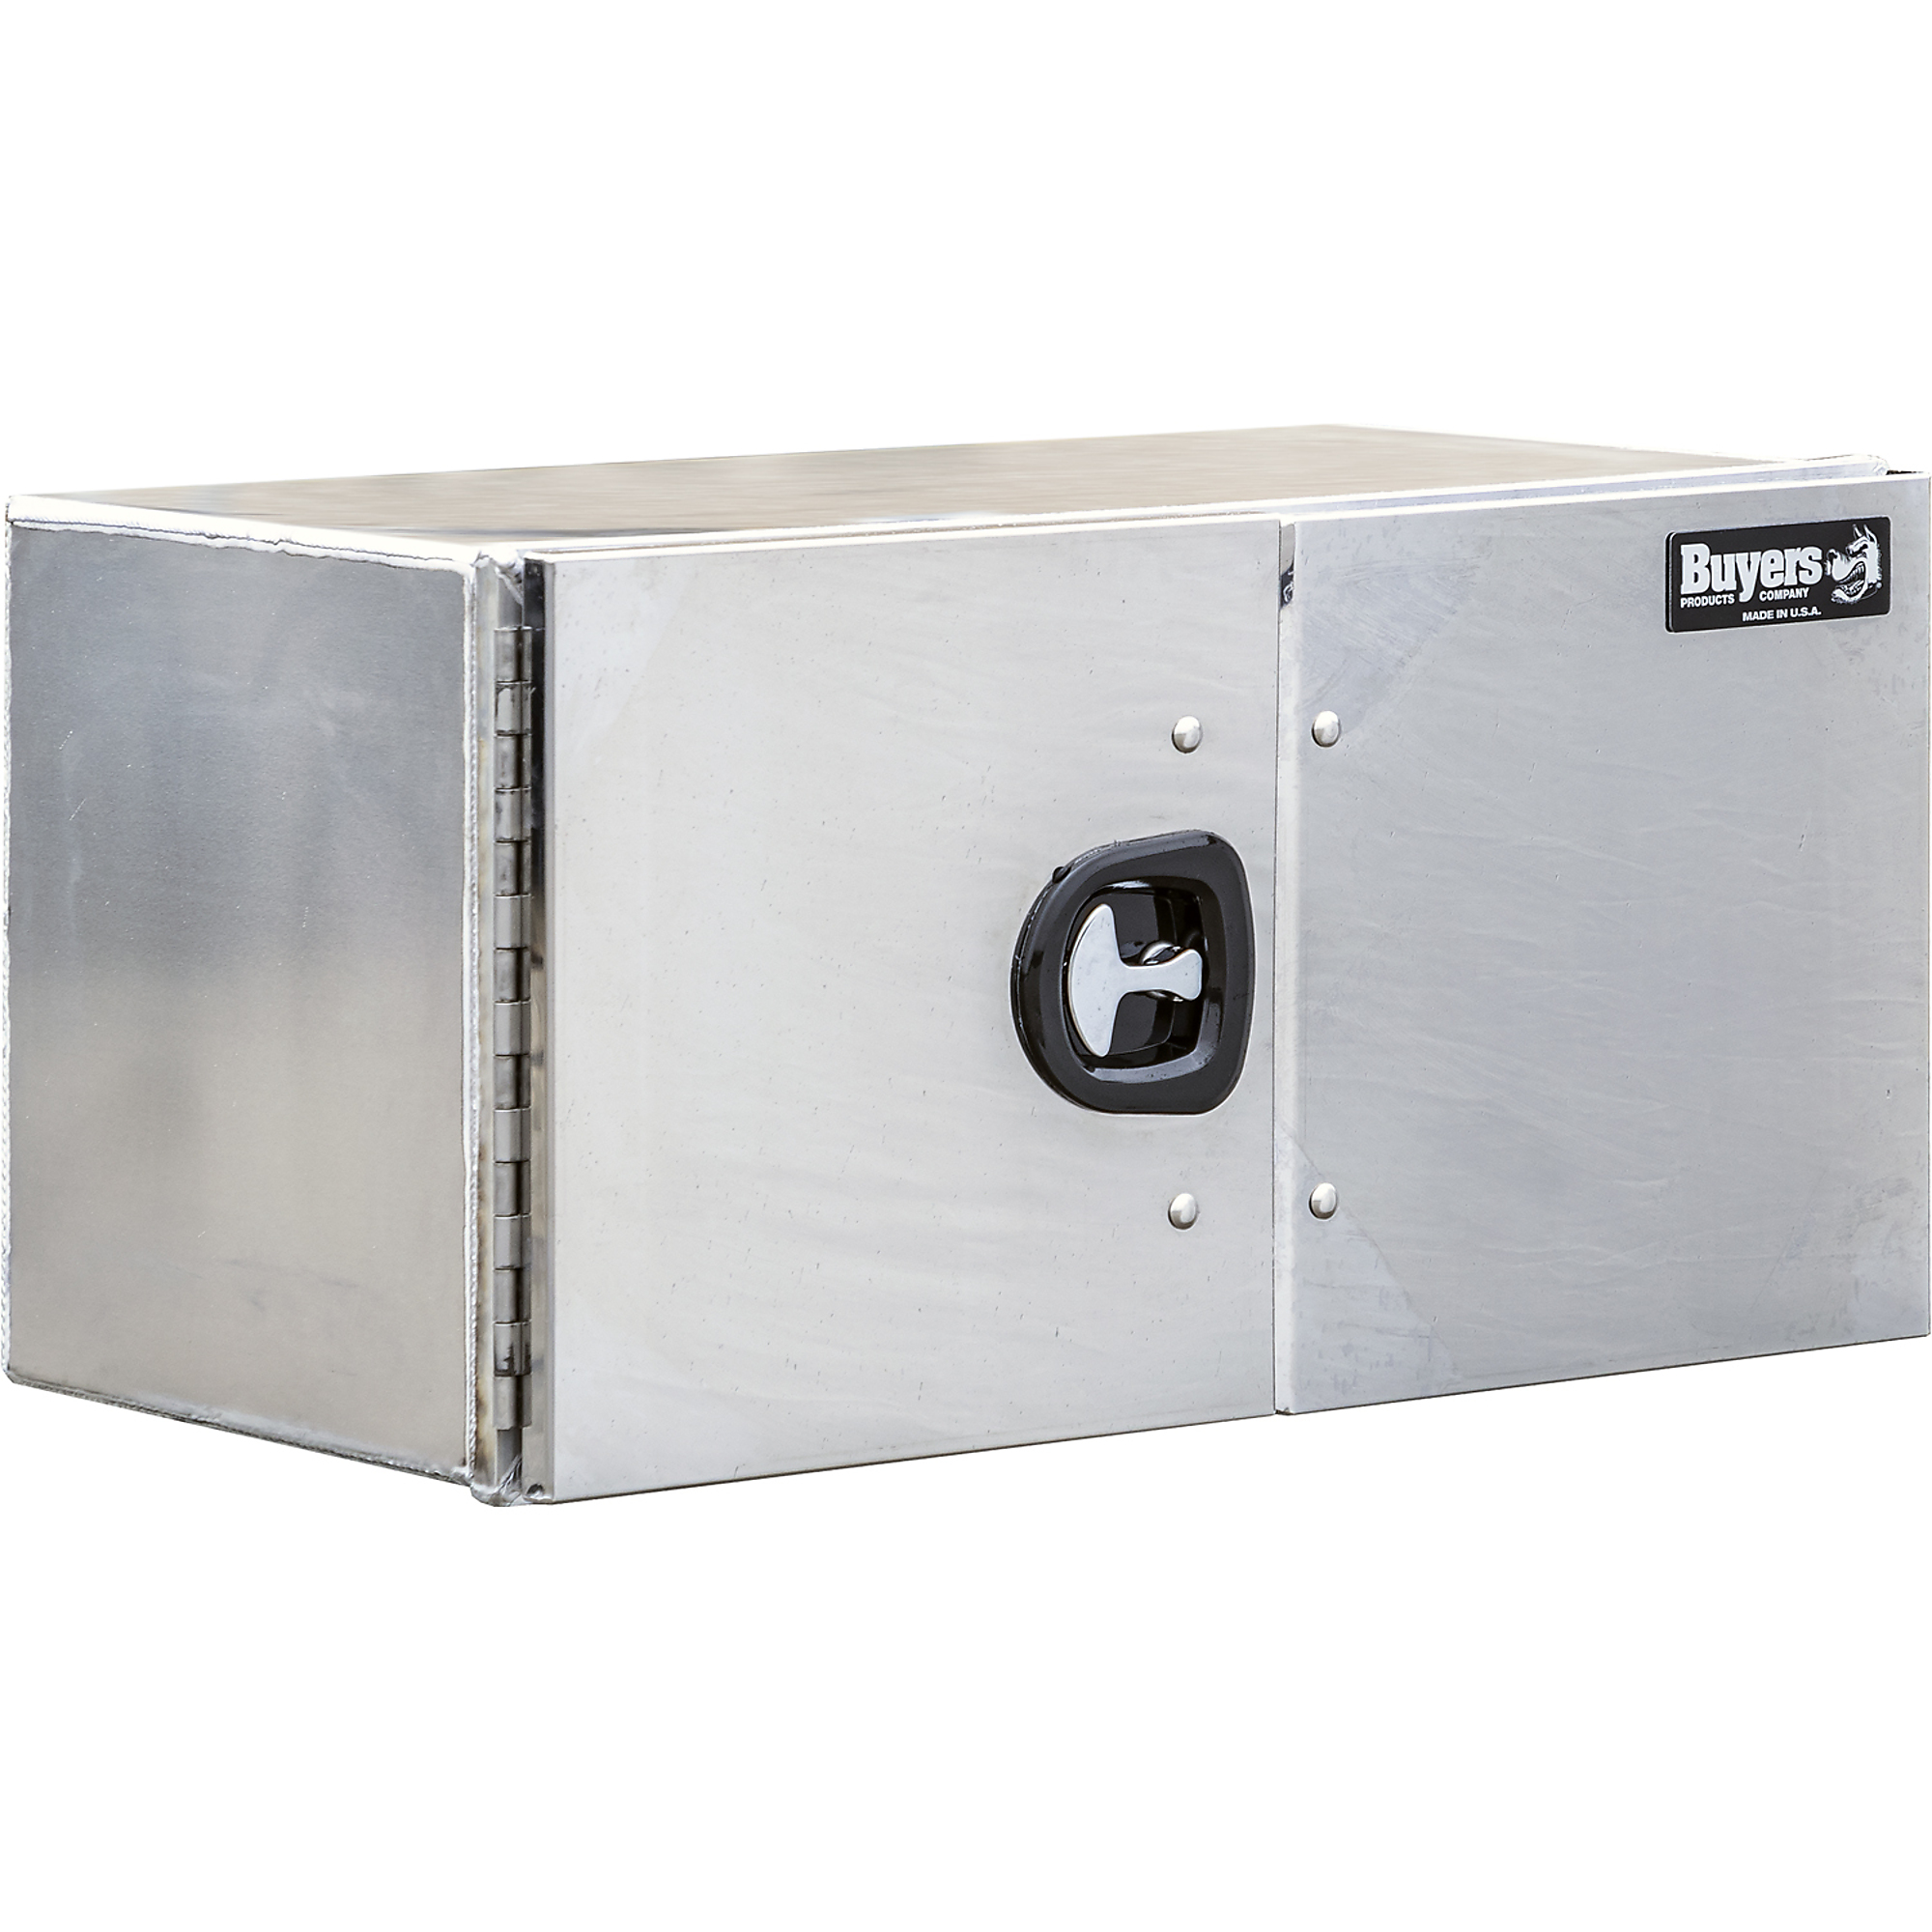 Buyers Products, 24x24x60 Aluminum Barn Door Underbody Truck Box, Width 24 in, Material Aluminum, Color Finish Smooth Silver, Model 1705585